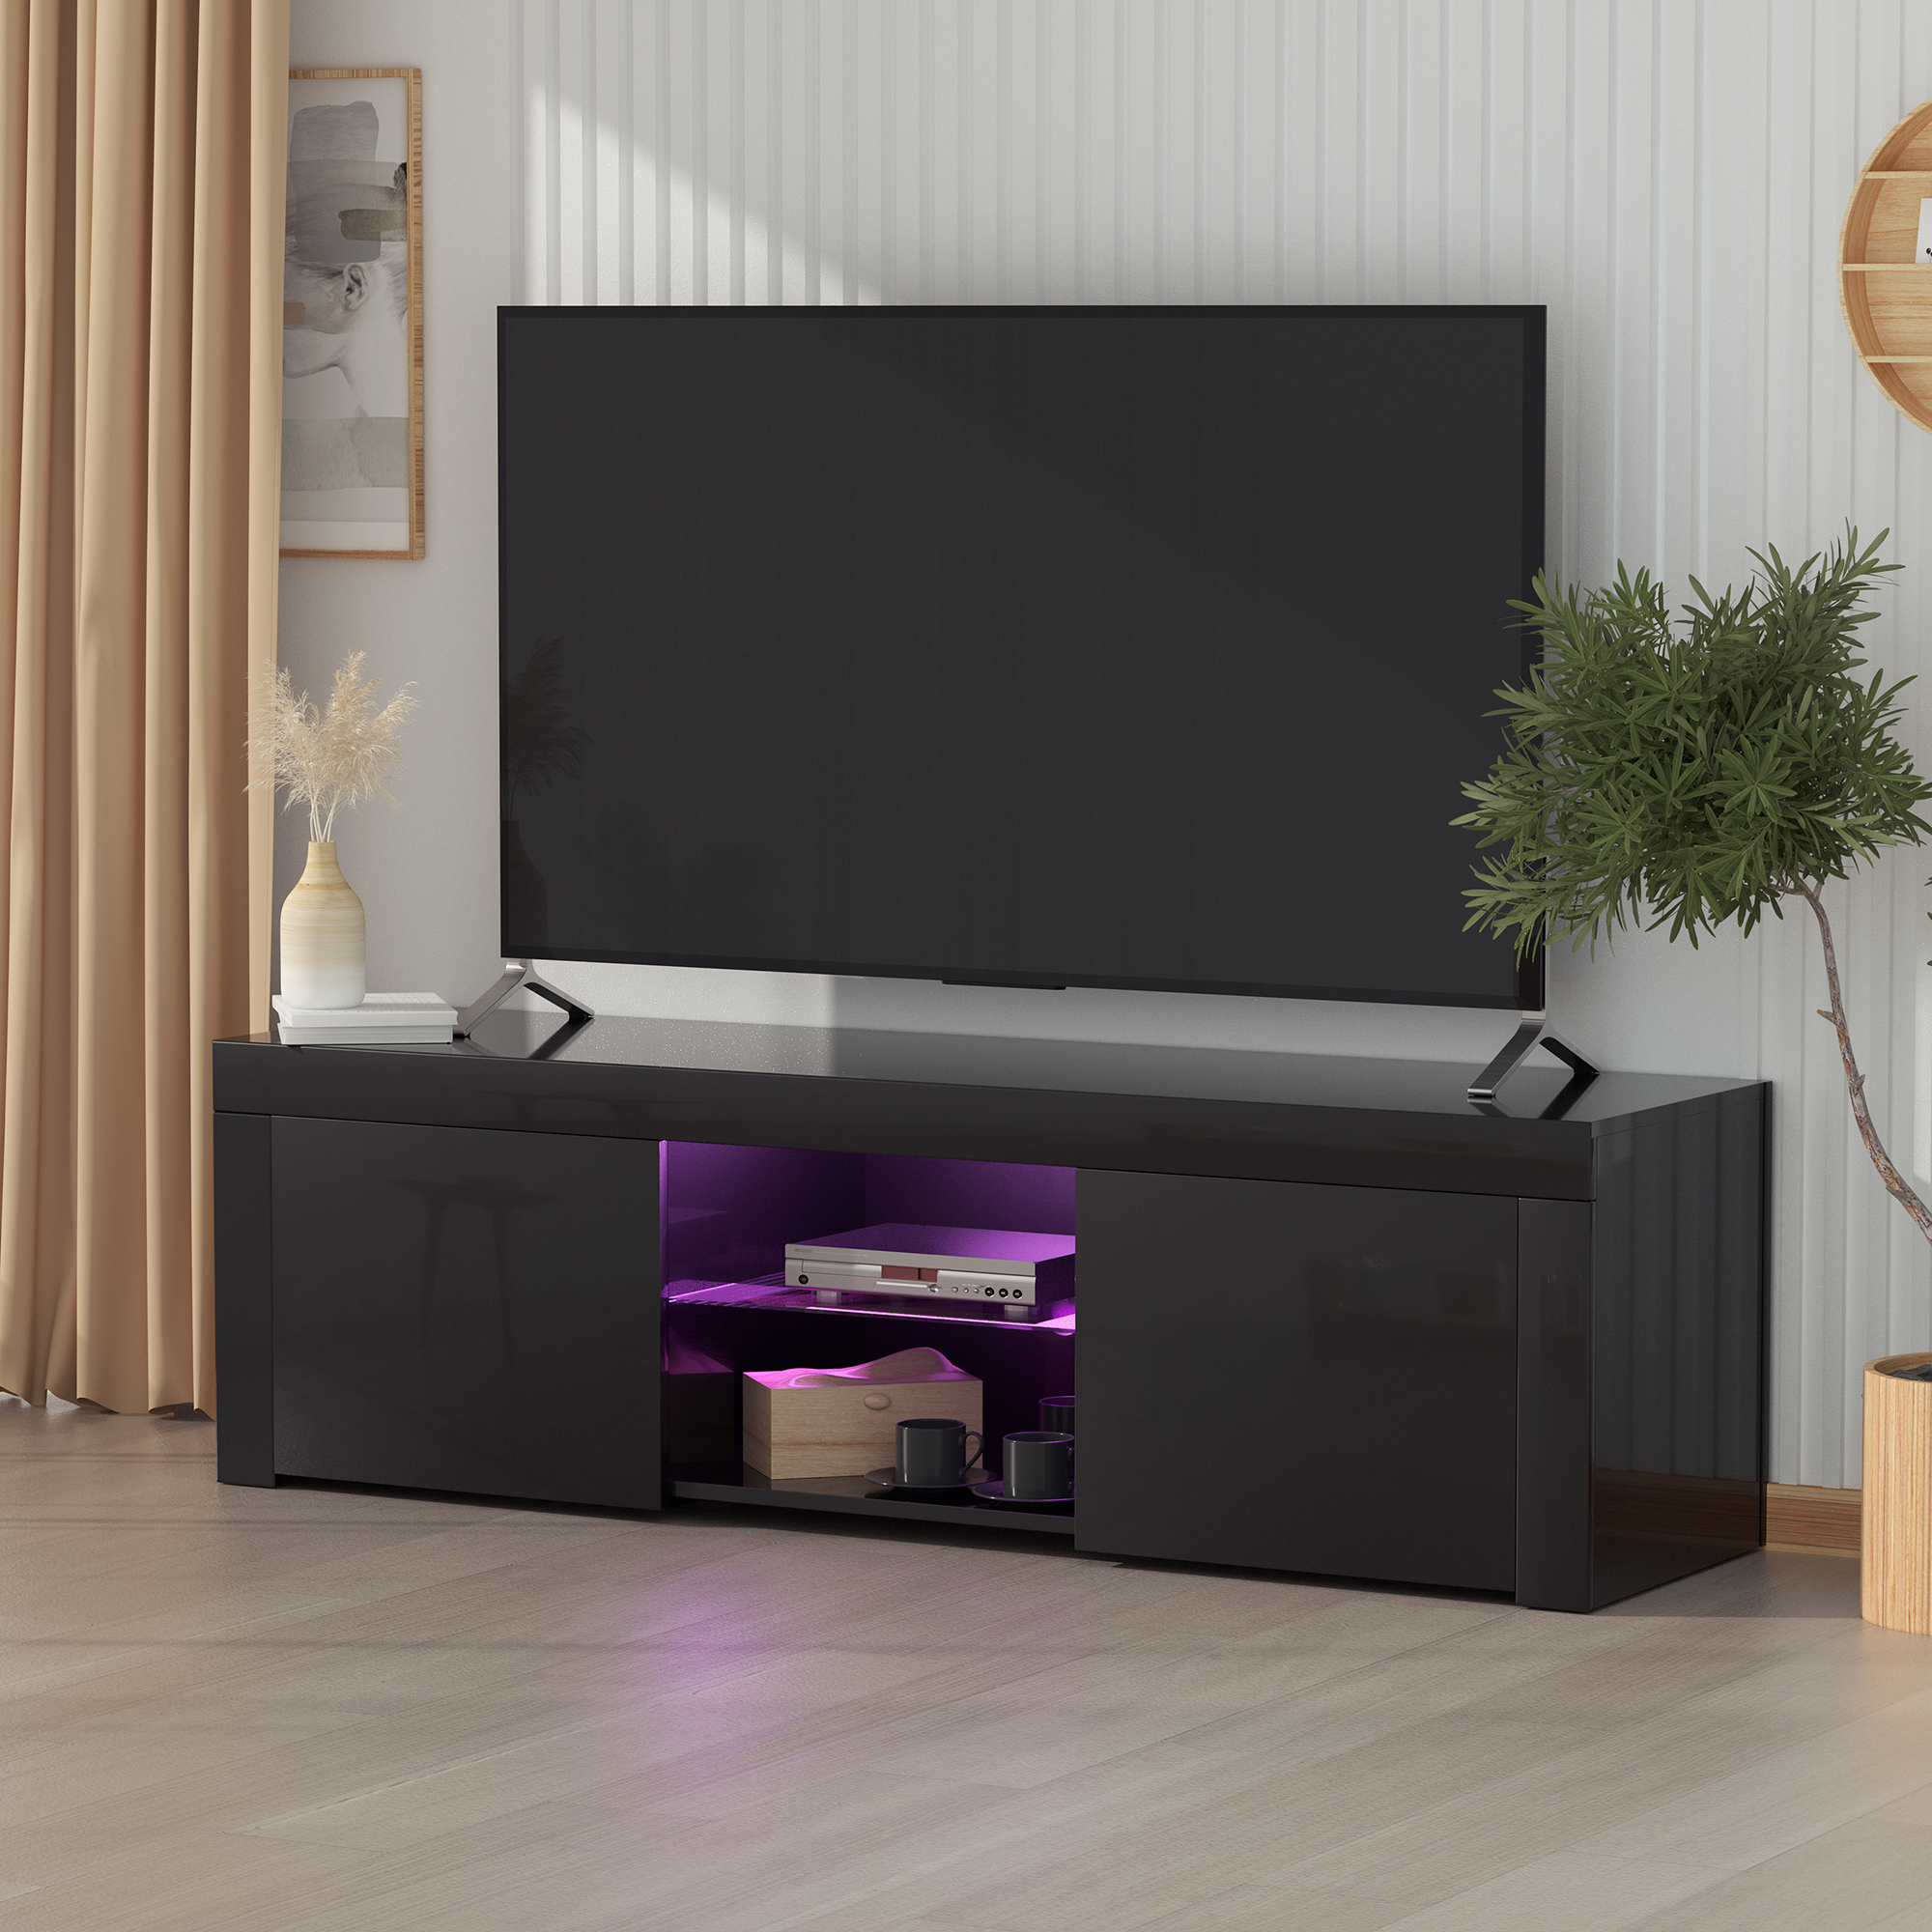 Black morden TV Stand with LED Lights,high glossy front TV Cabinet,can be assembled in Lounge Room, Living Room or Bedroom,color:BLACK-Boyel Living